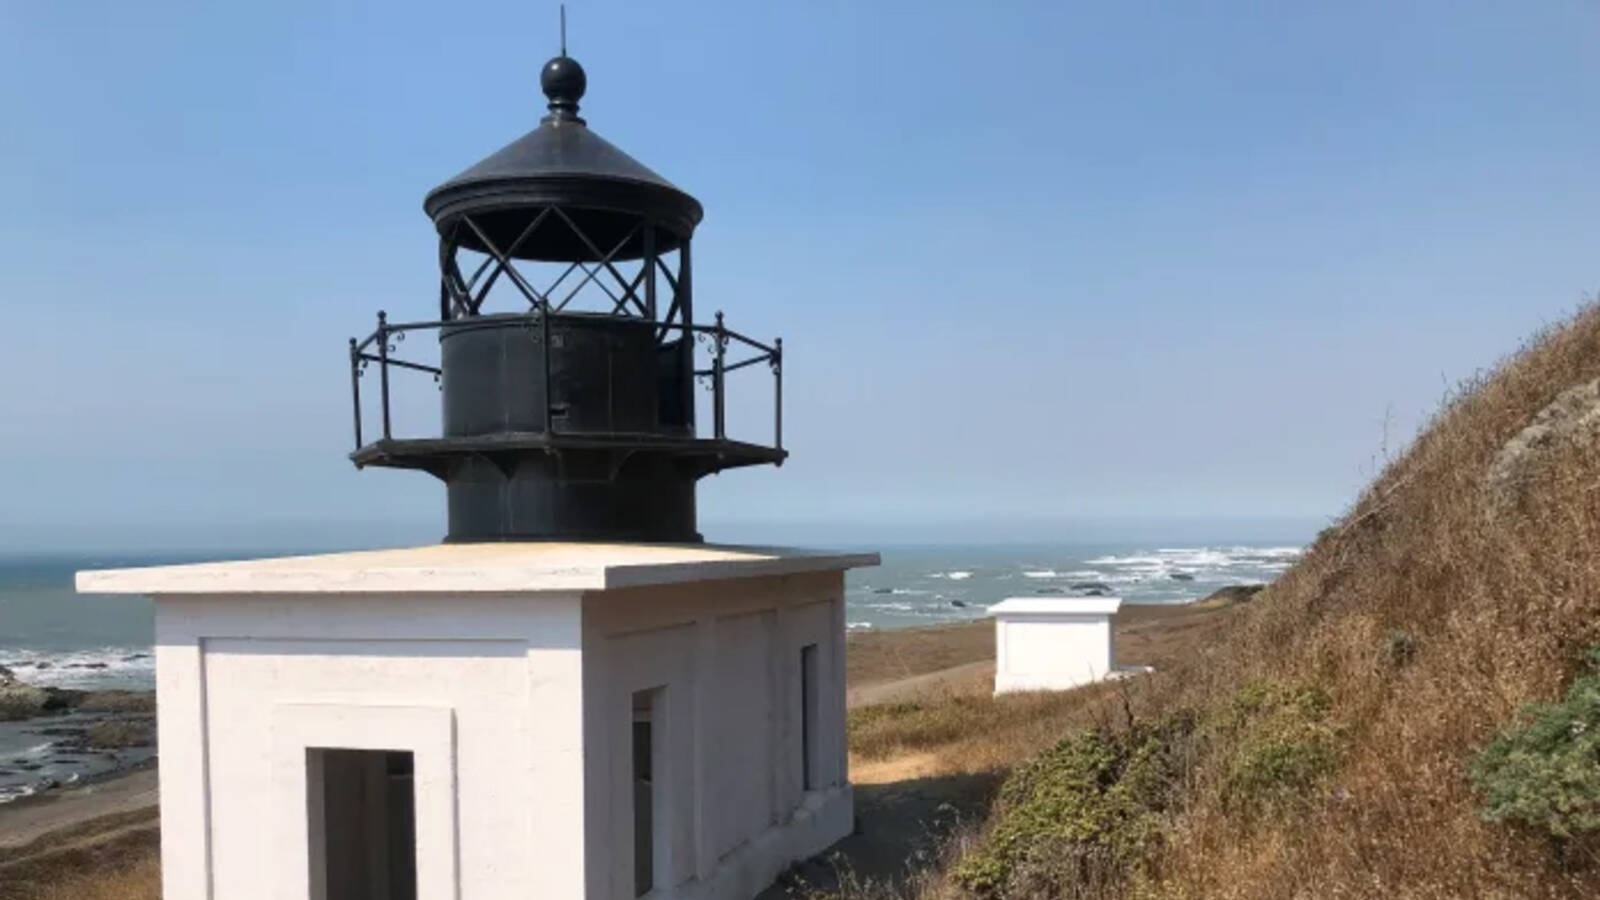 <p>Completed structural repairs and repainting of the 114-yearold Punta Gorda Light Station in California. The station was a beacon for ship navigation from about 1910 until 1951 and is listed on the National Register of Historic Places. </p>